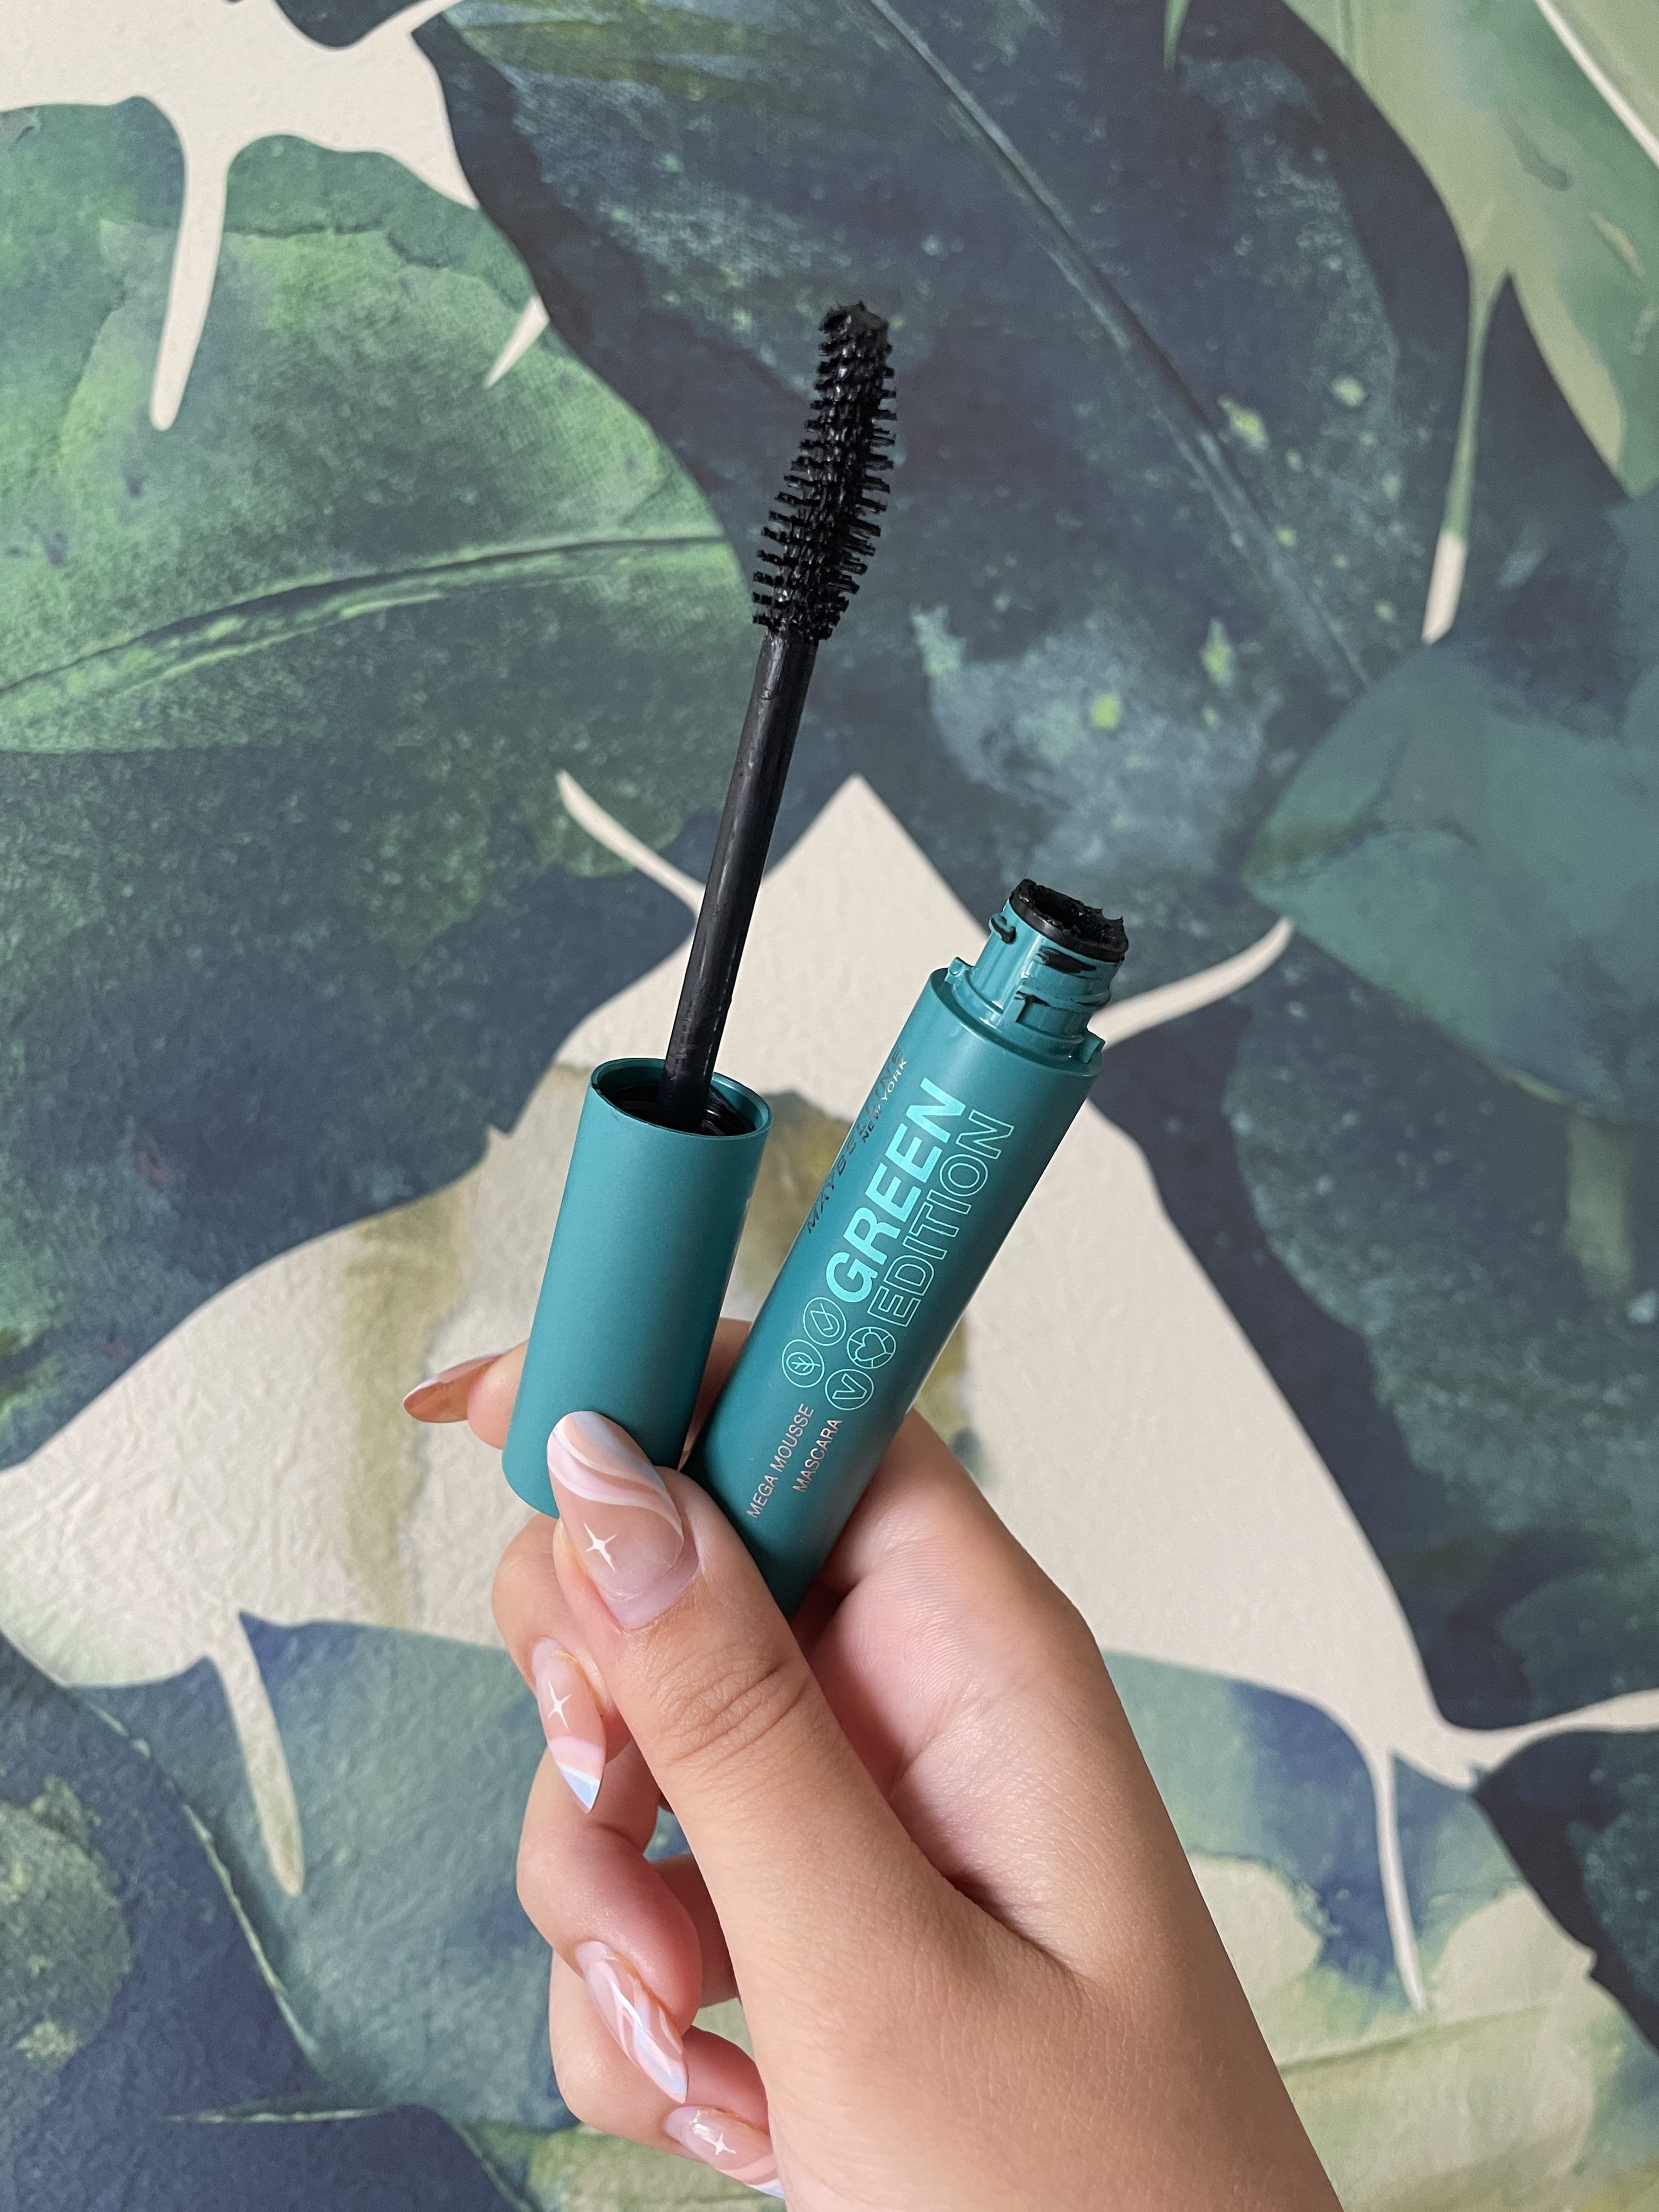 Mousse Maybelline POPSUGAR + Edition Review Mascara Photos Beauty Mega Green |